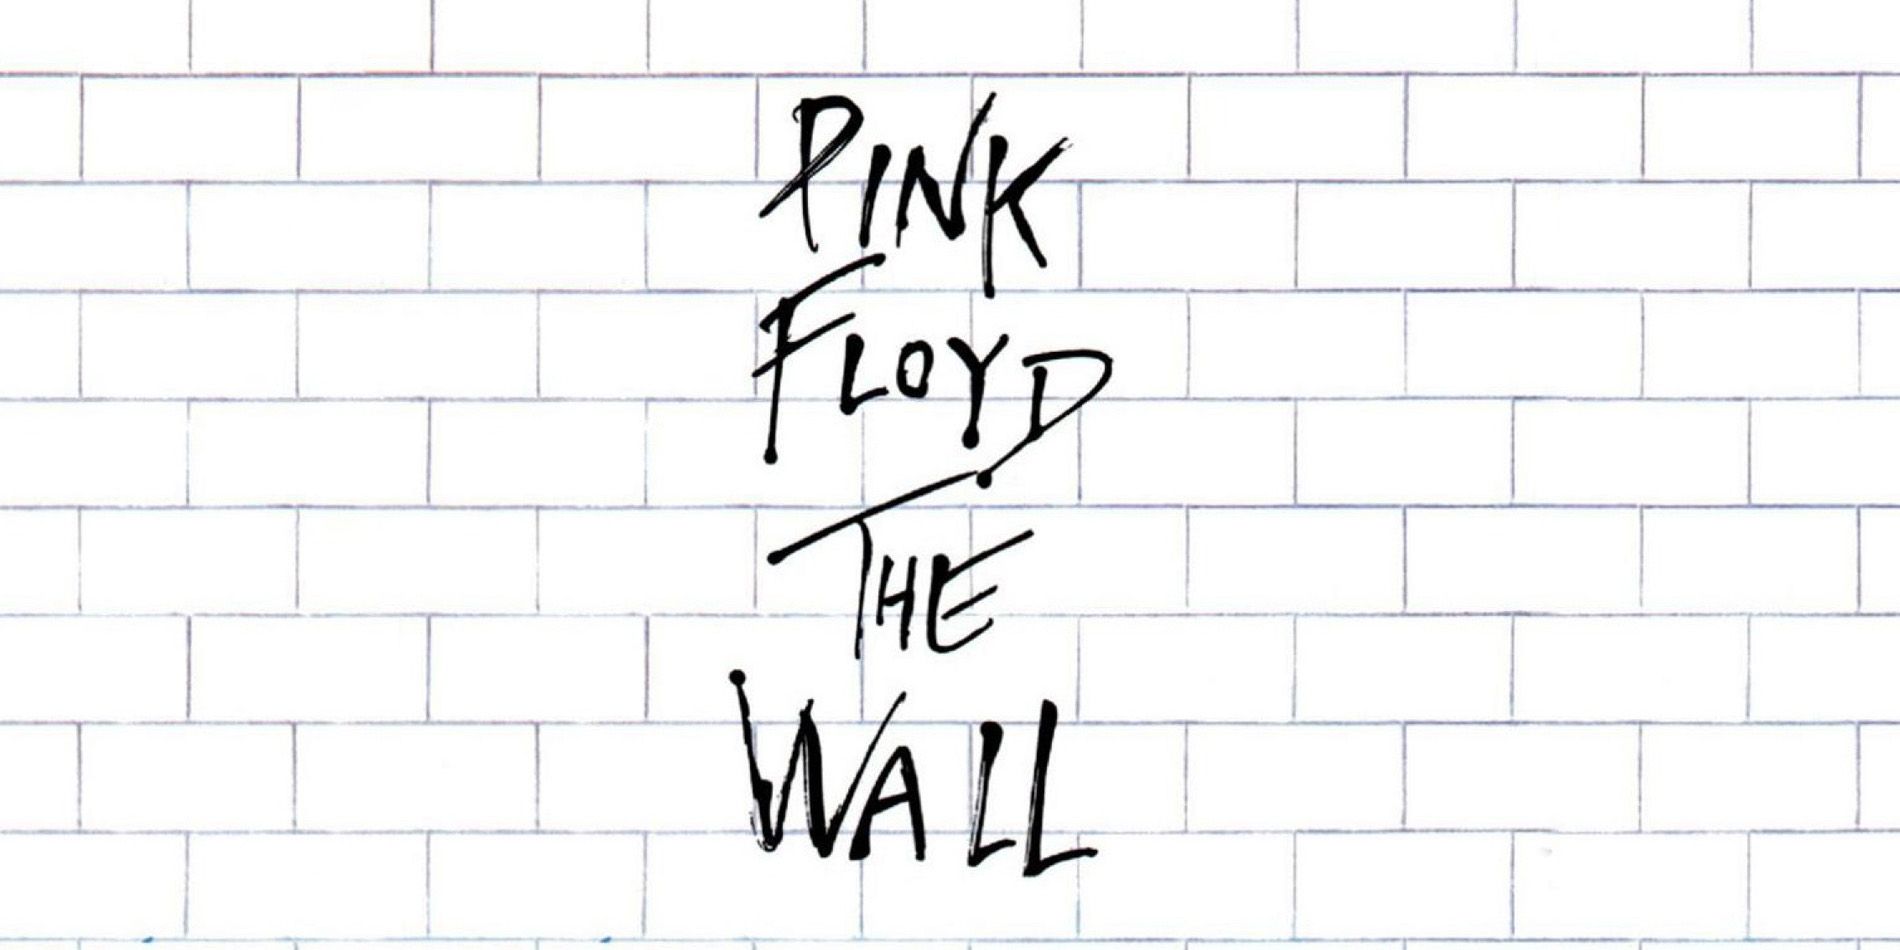 Pink Floyd's the Wall album cover